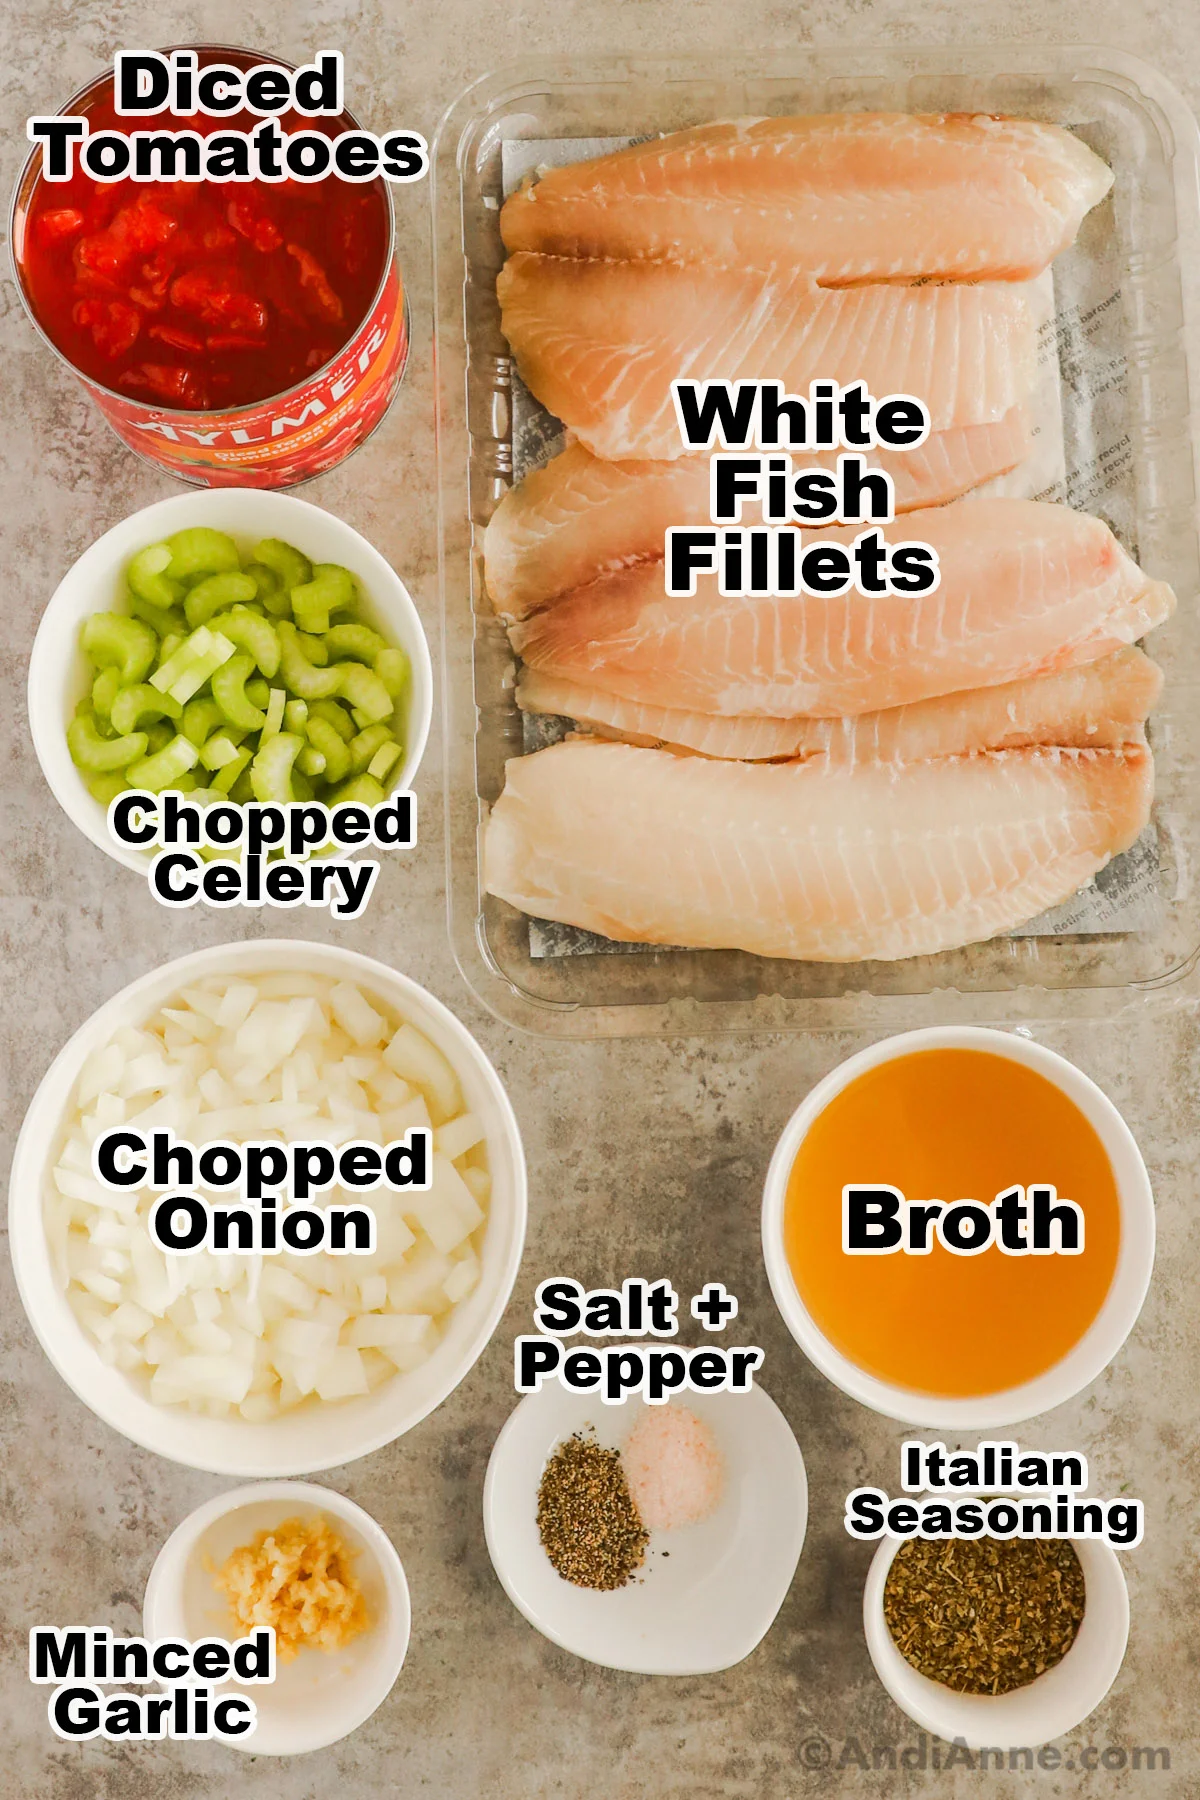 Recipe ingredients including white fish fillets, canned diced tomatoes, chopped celery, chopped onion, broth, italian seasoning, salt and pepper.